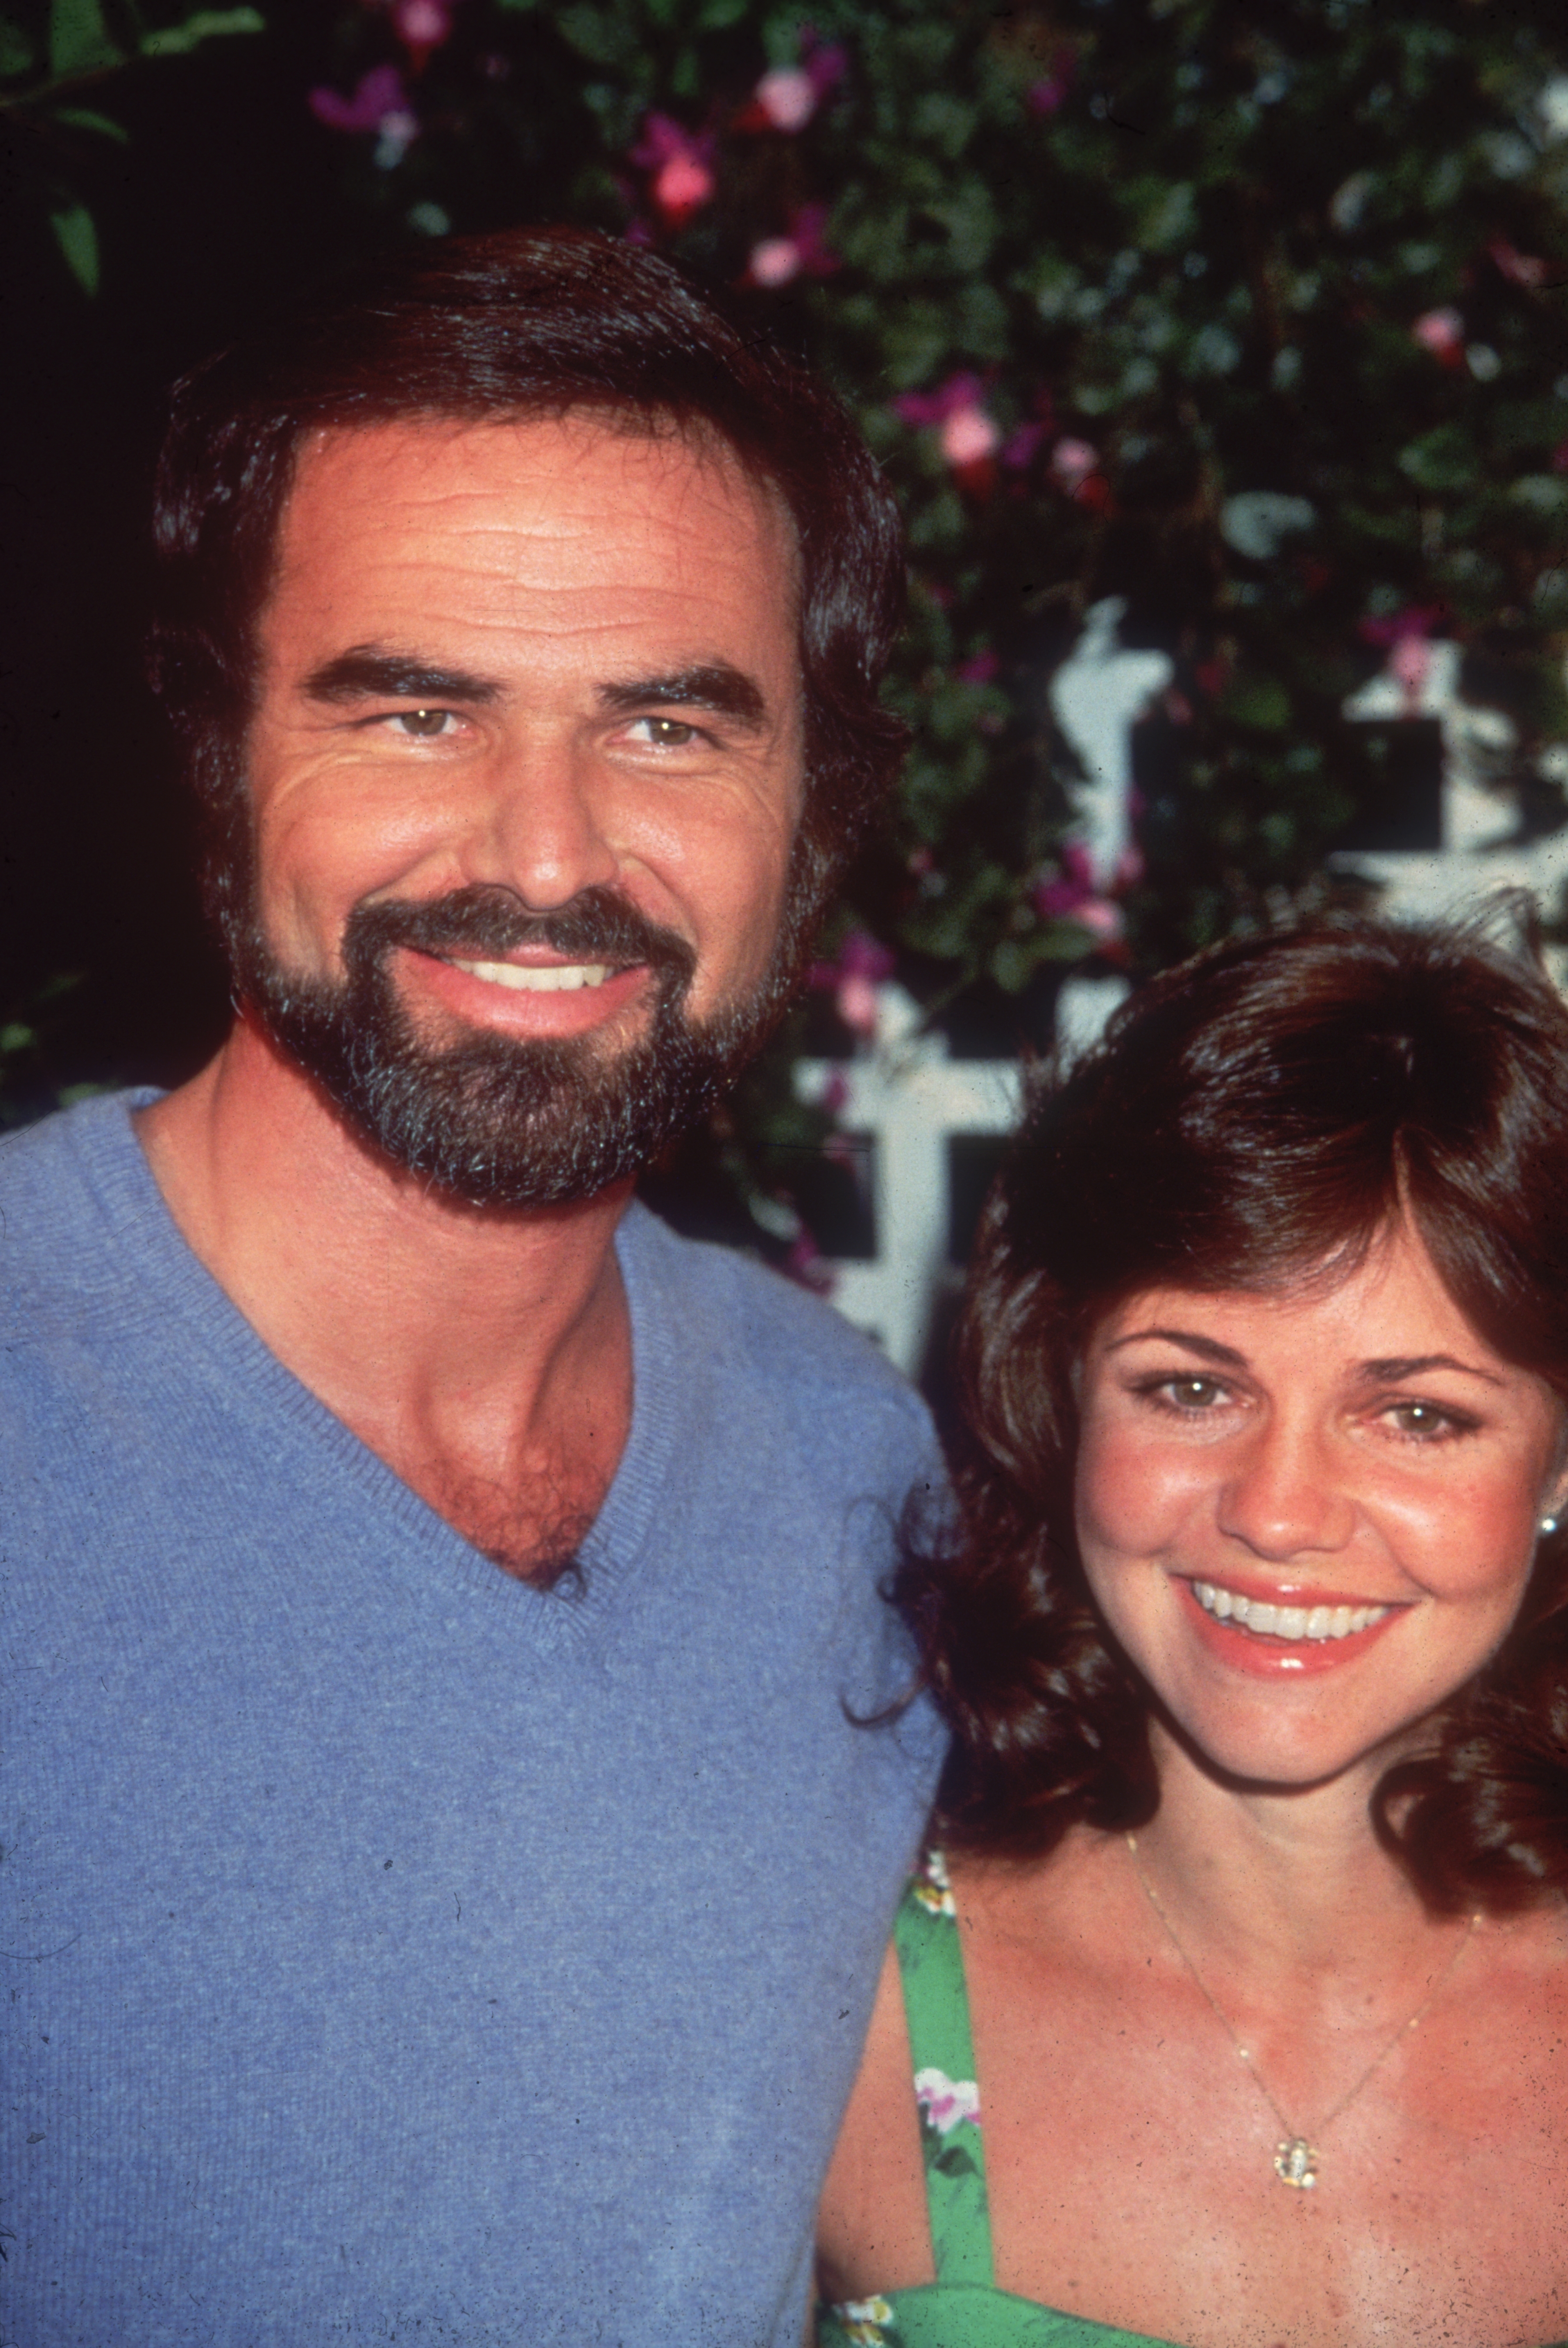 Actor Burt Reynolds and actress Sally Field in August 1977 | Source: Getty Images